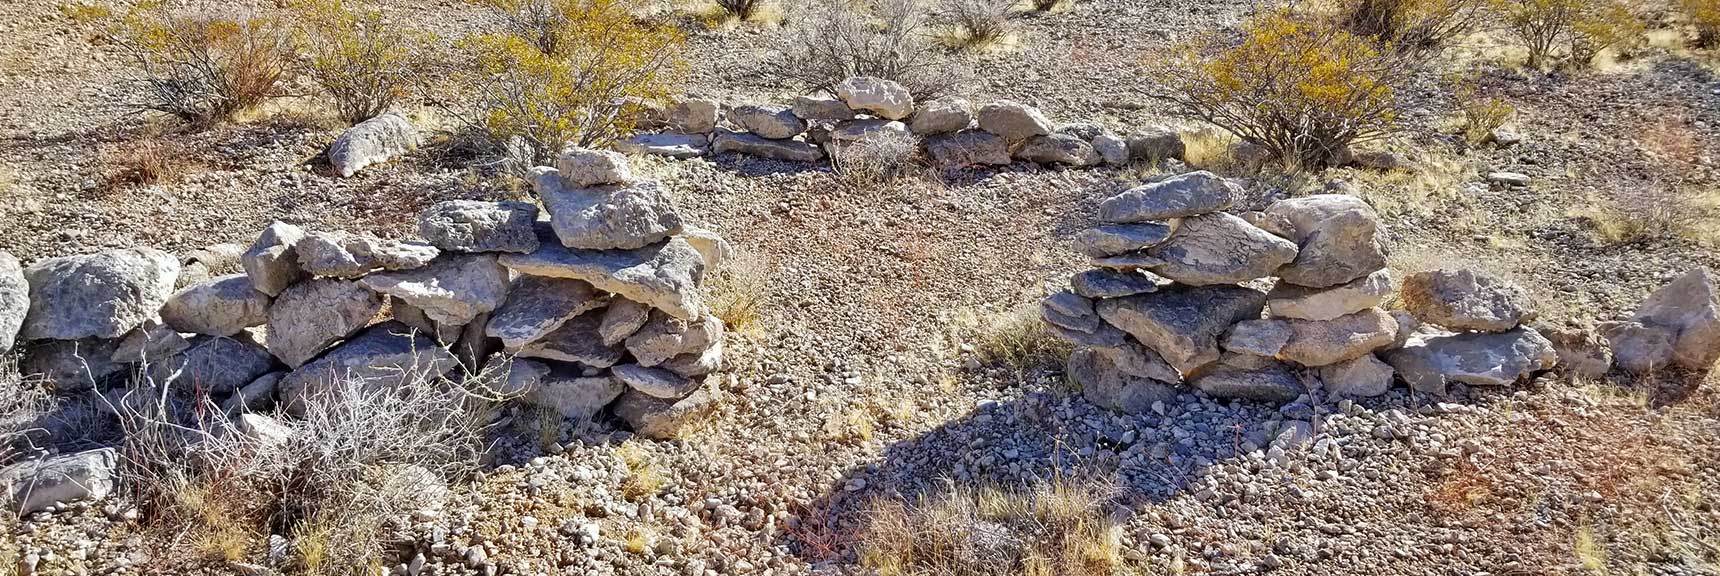 Curious Structure on North Side of Fossil Ridge in the Sheep Range, Desert National Wildlife Refuge, Nevada